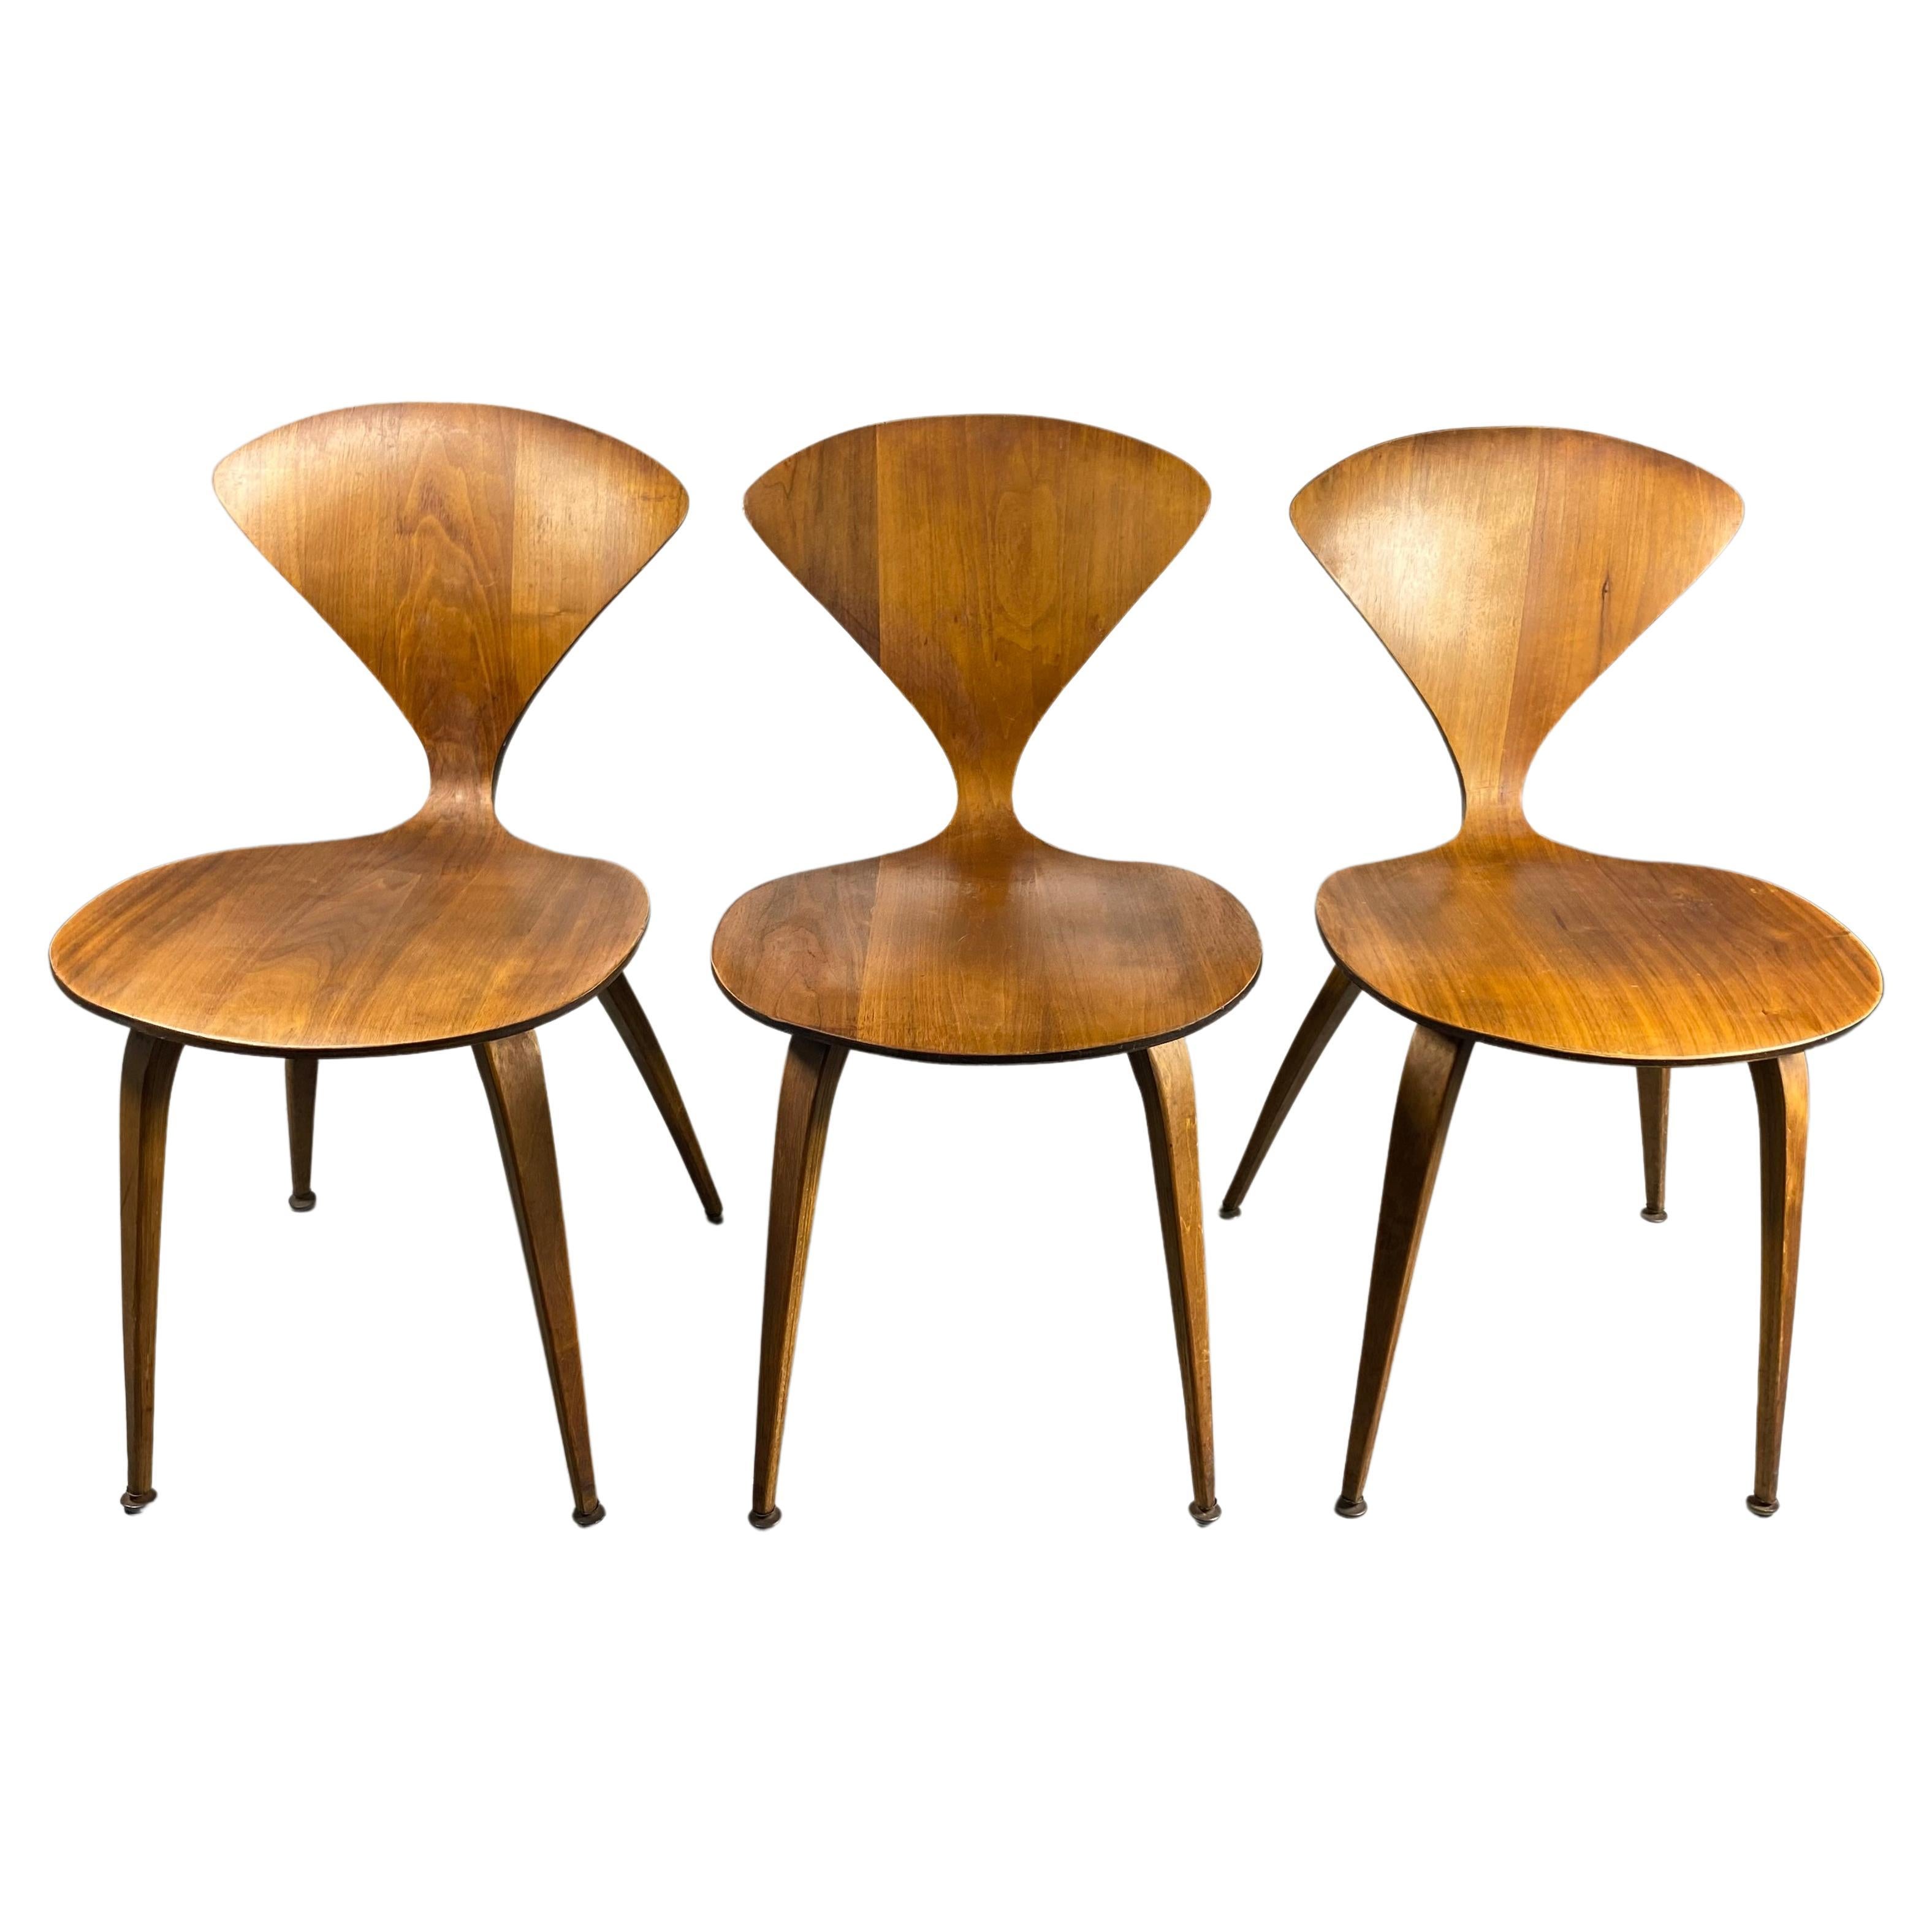 Norman Cherner Mid-Century Modern Matching Side Chairs For Sale